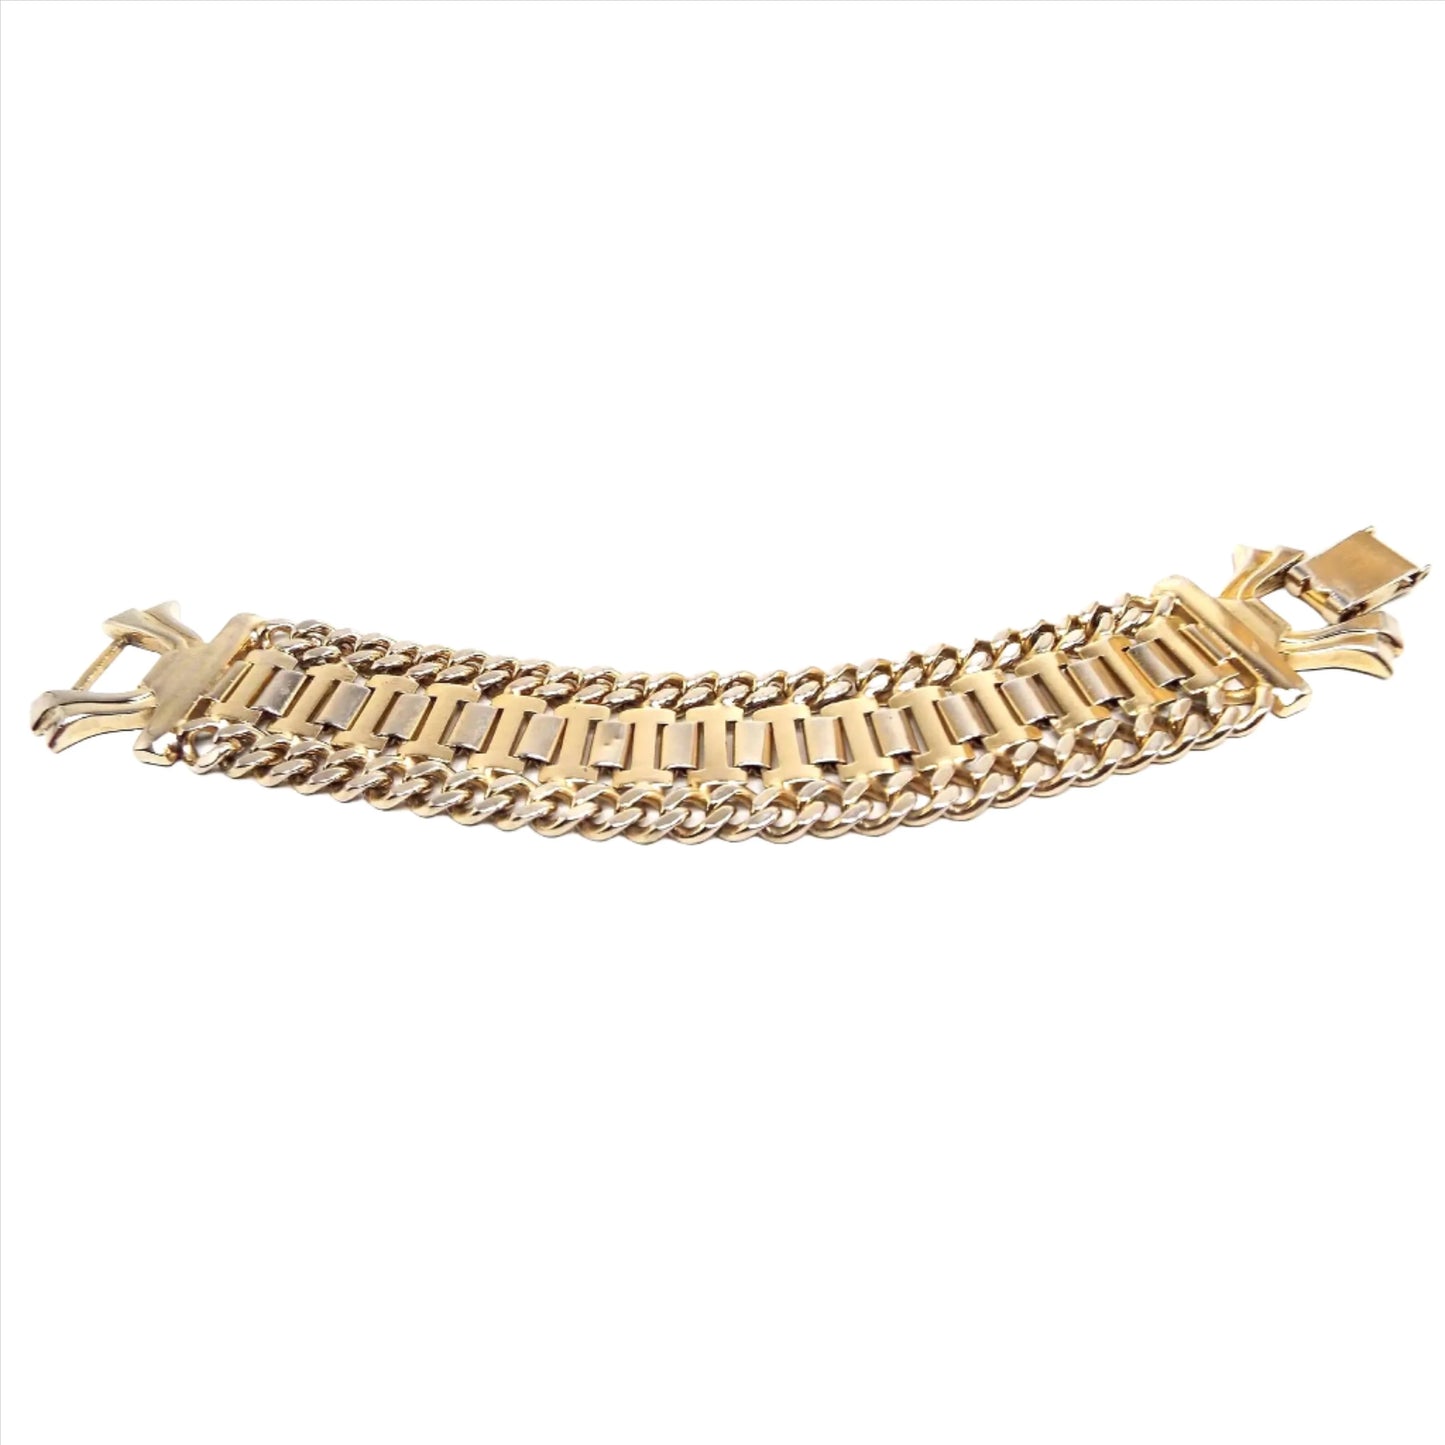 Angled view of the Mid Century vintage wide link chain bracelet. It is gold tone in color and has curved rectangle links the in the middle and faceted curb link chain on either side. There is a large snap lock clasp on the end.